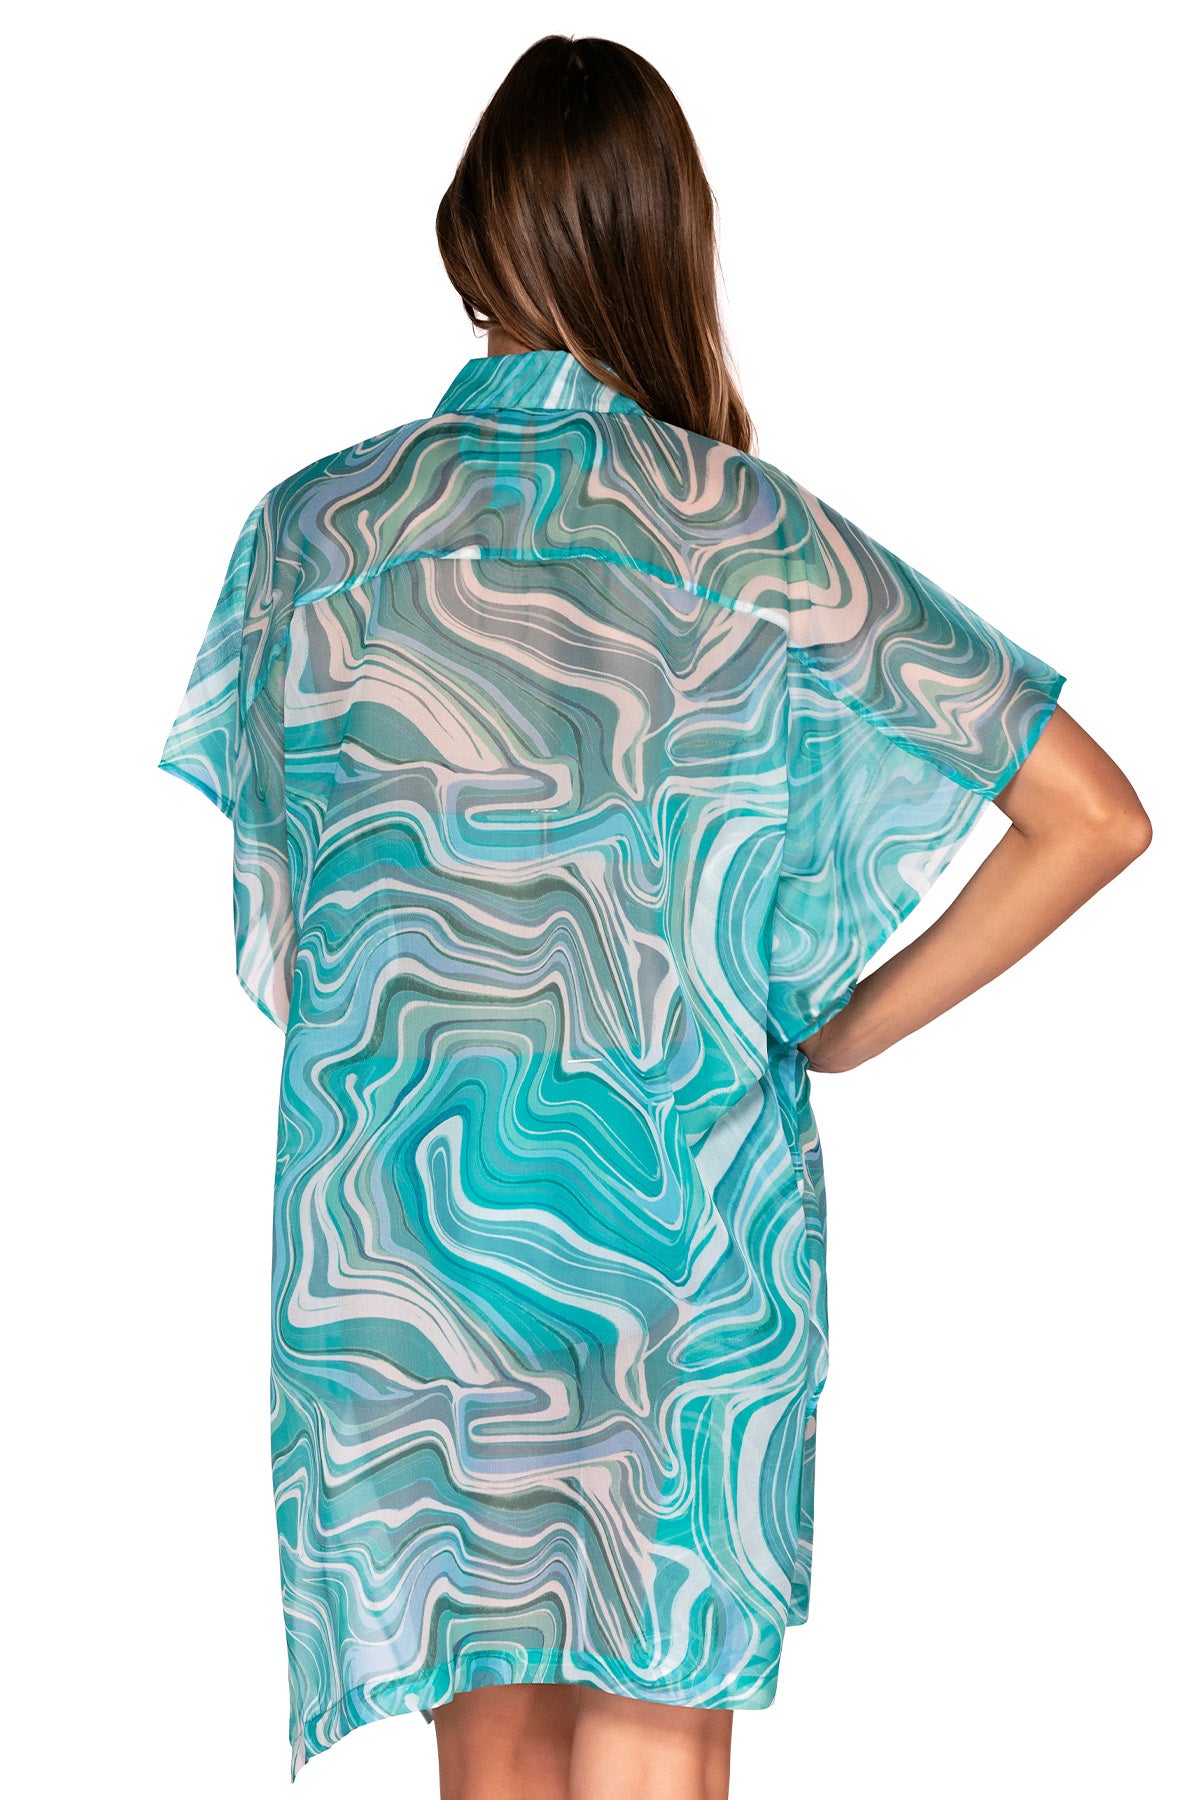 Back view of Sunsets Moon Tide Shore Thing Tunic